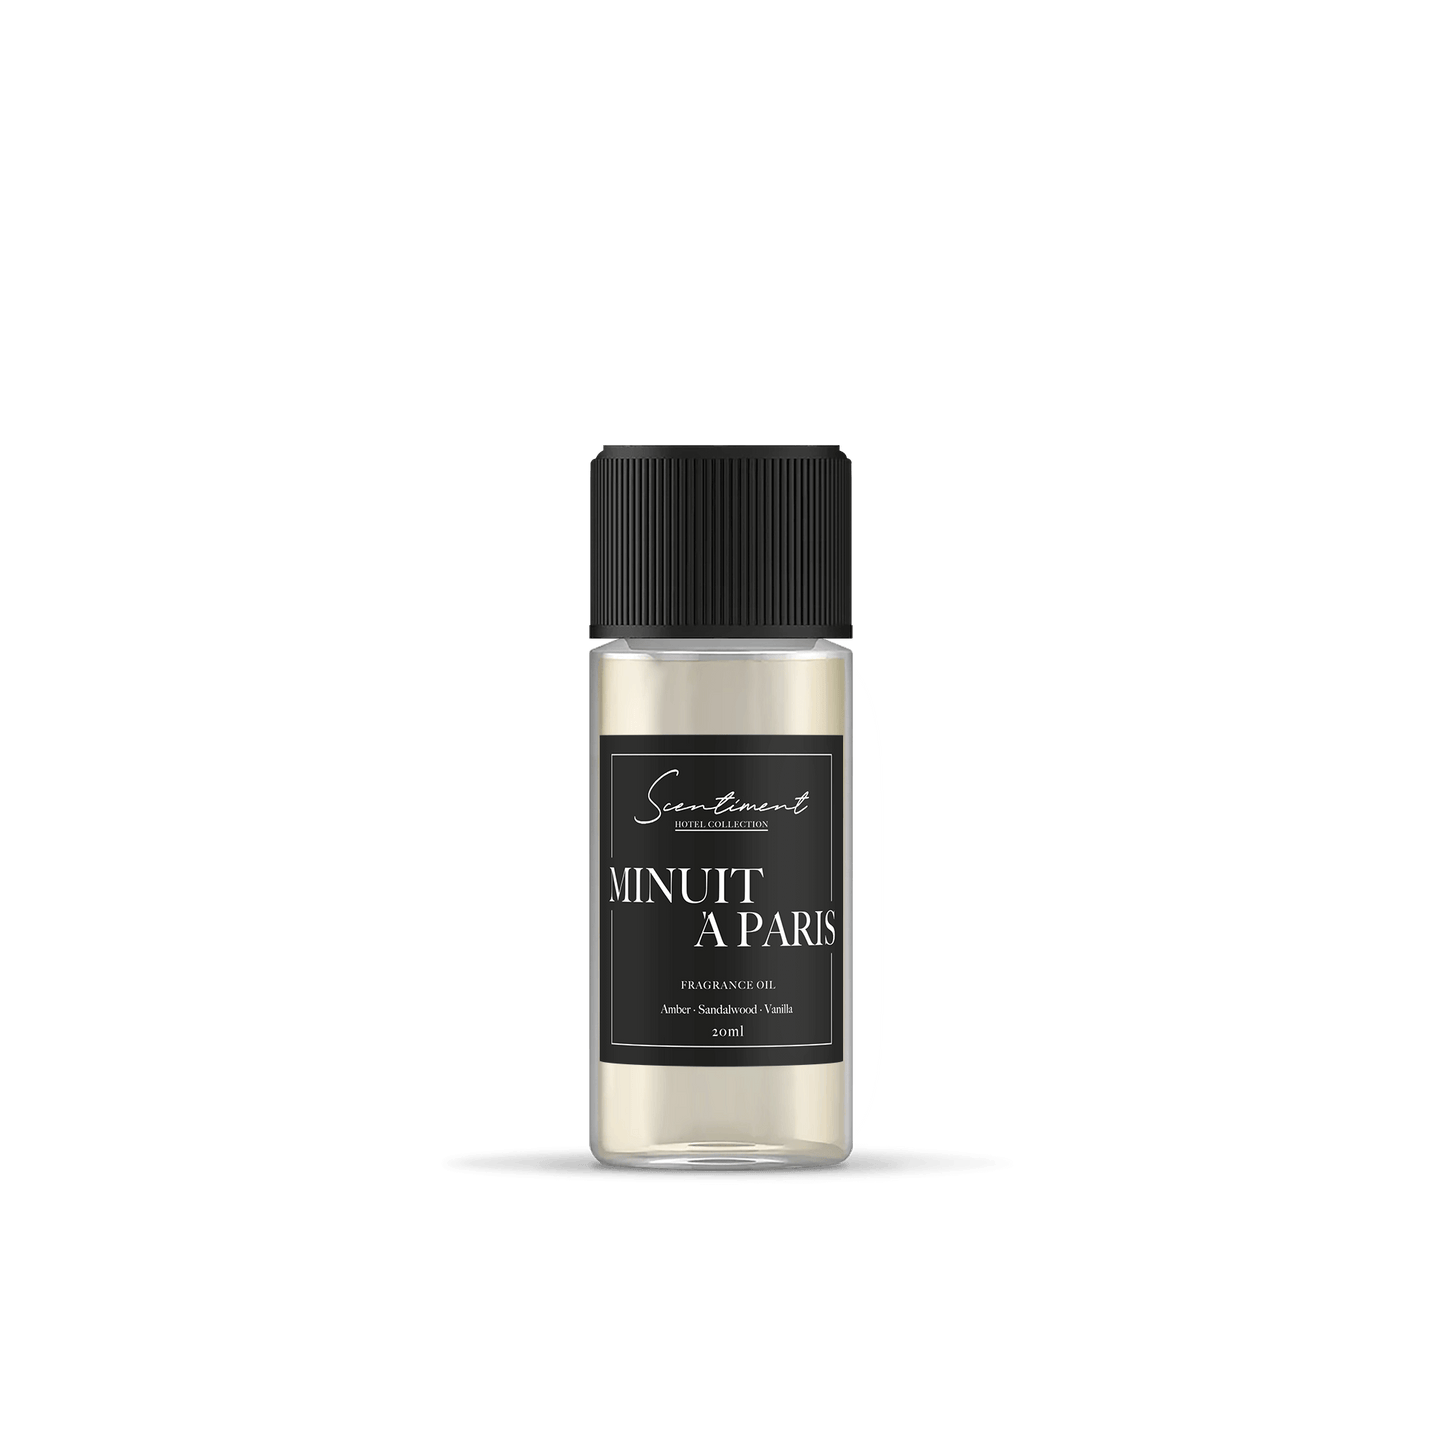 Miniut A Paris Fragrance Oil, ispired by Costes® Hotel, with notes of Amber, Sandalwood, and Vanilla.